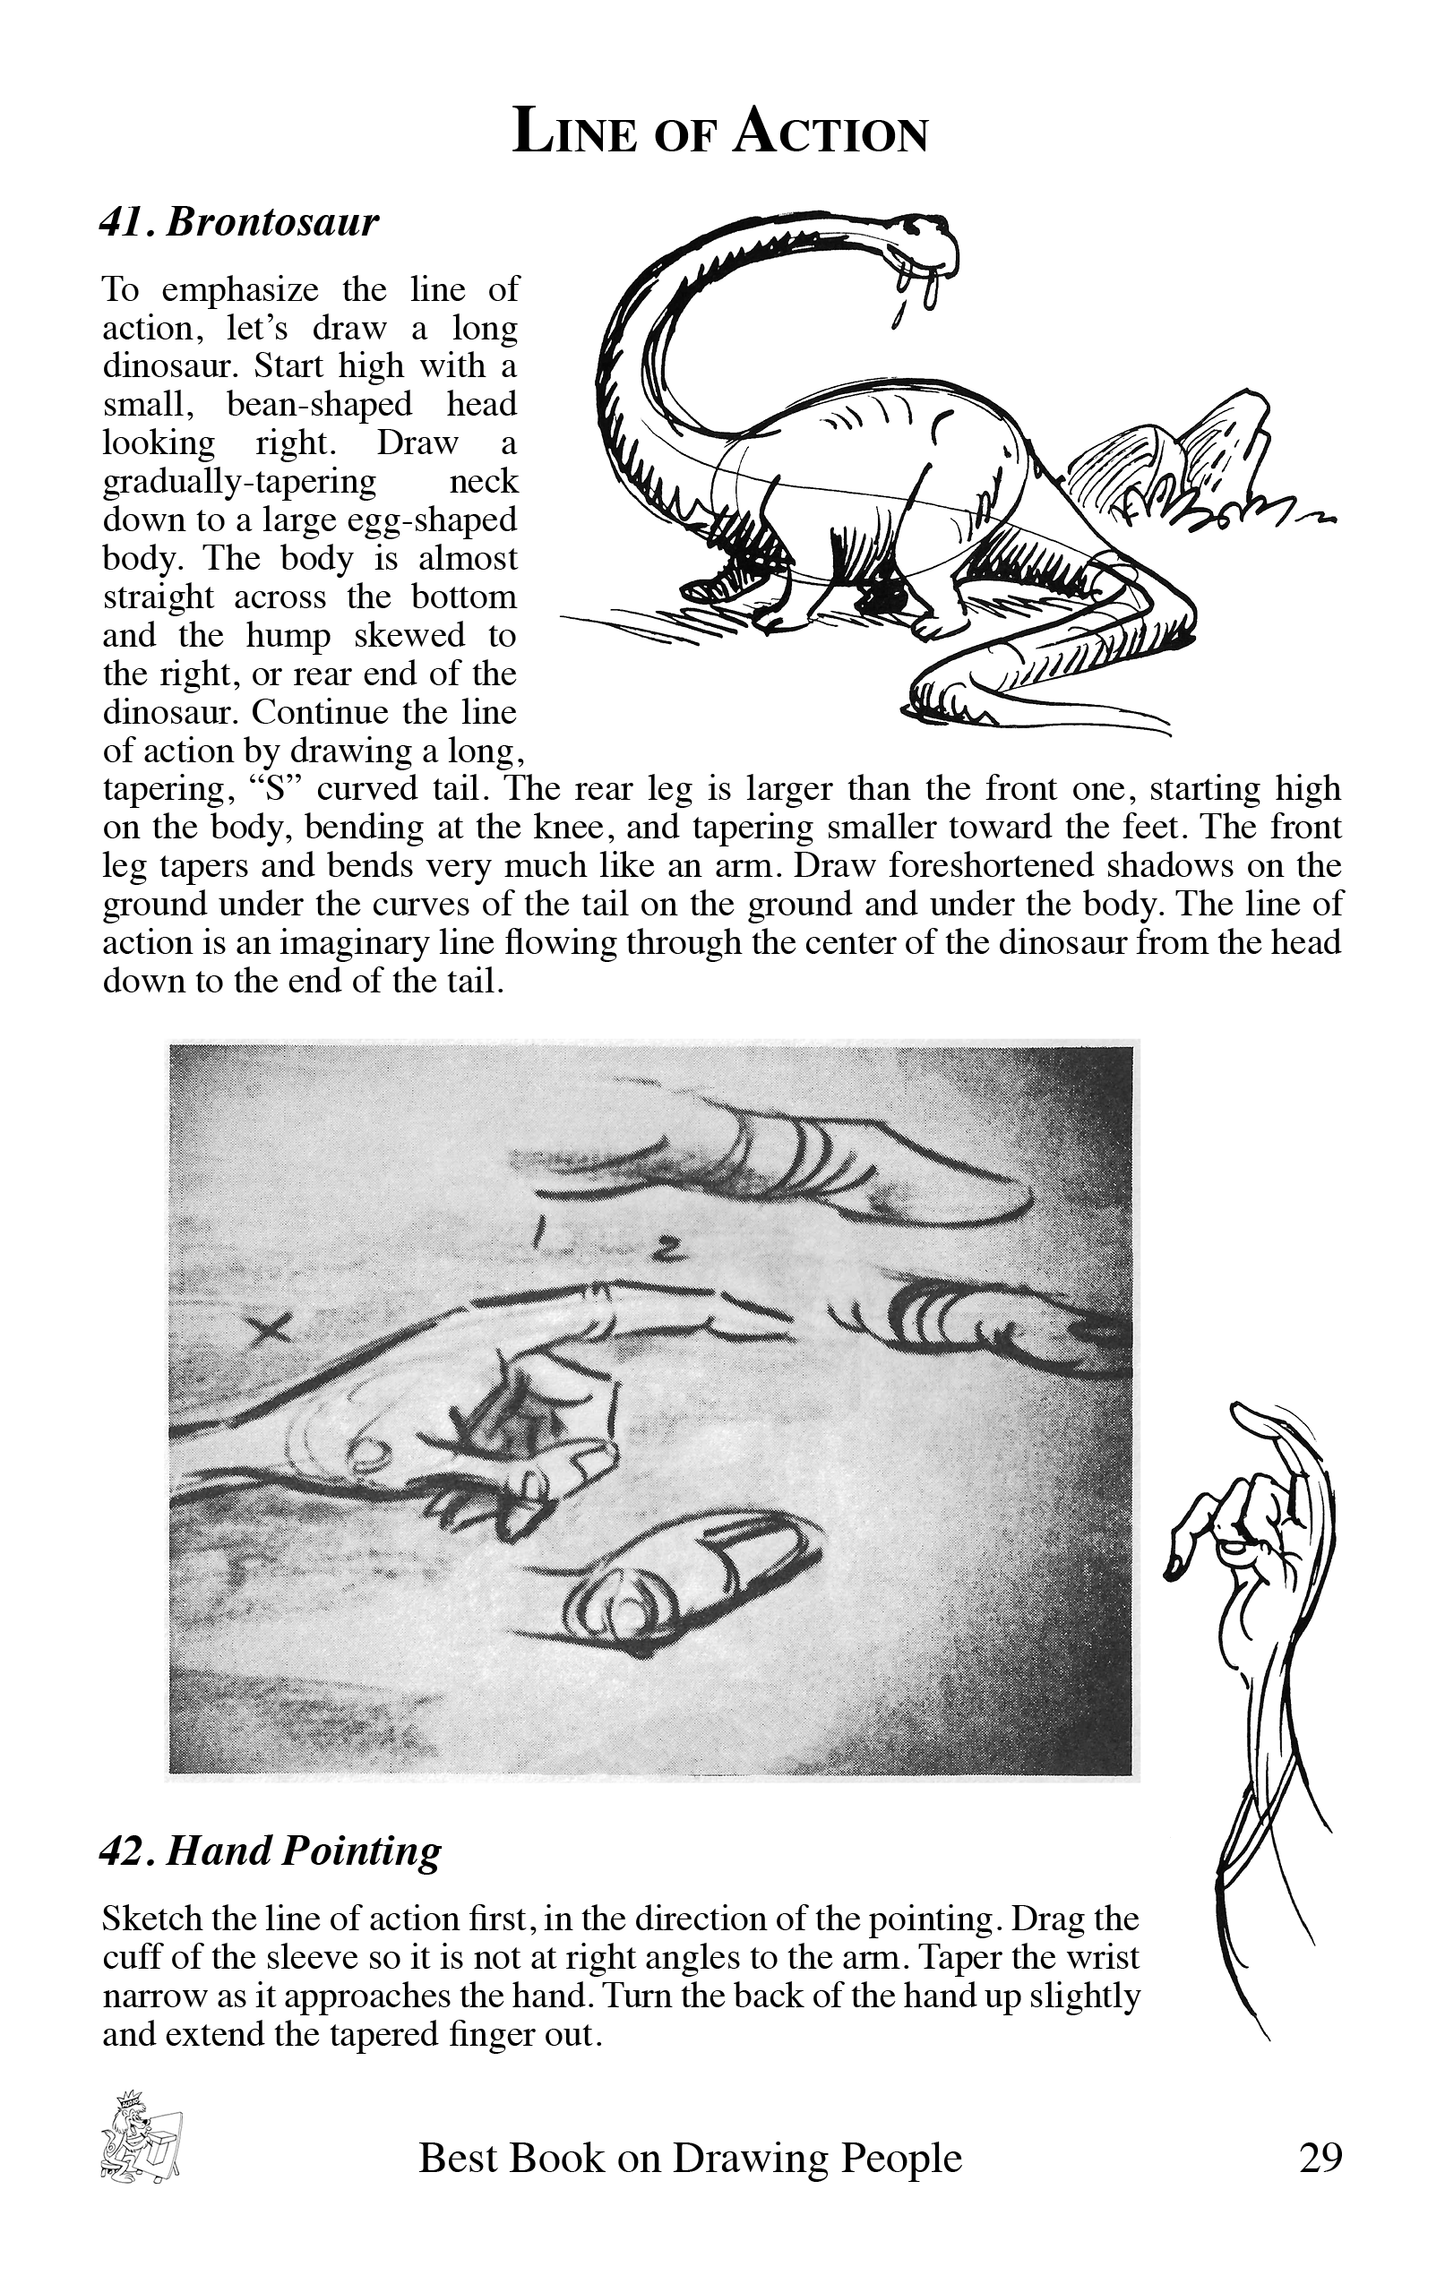 Line of Action sample page from the book Best Book on Drawing People by Bruce McIntyre